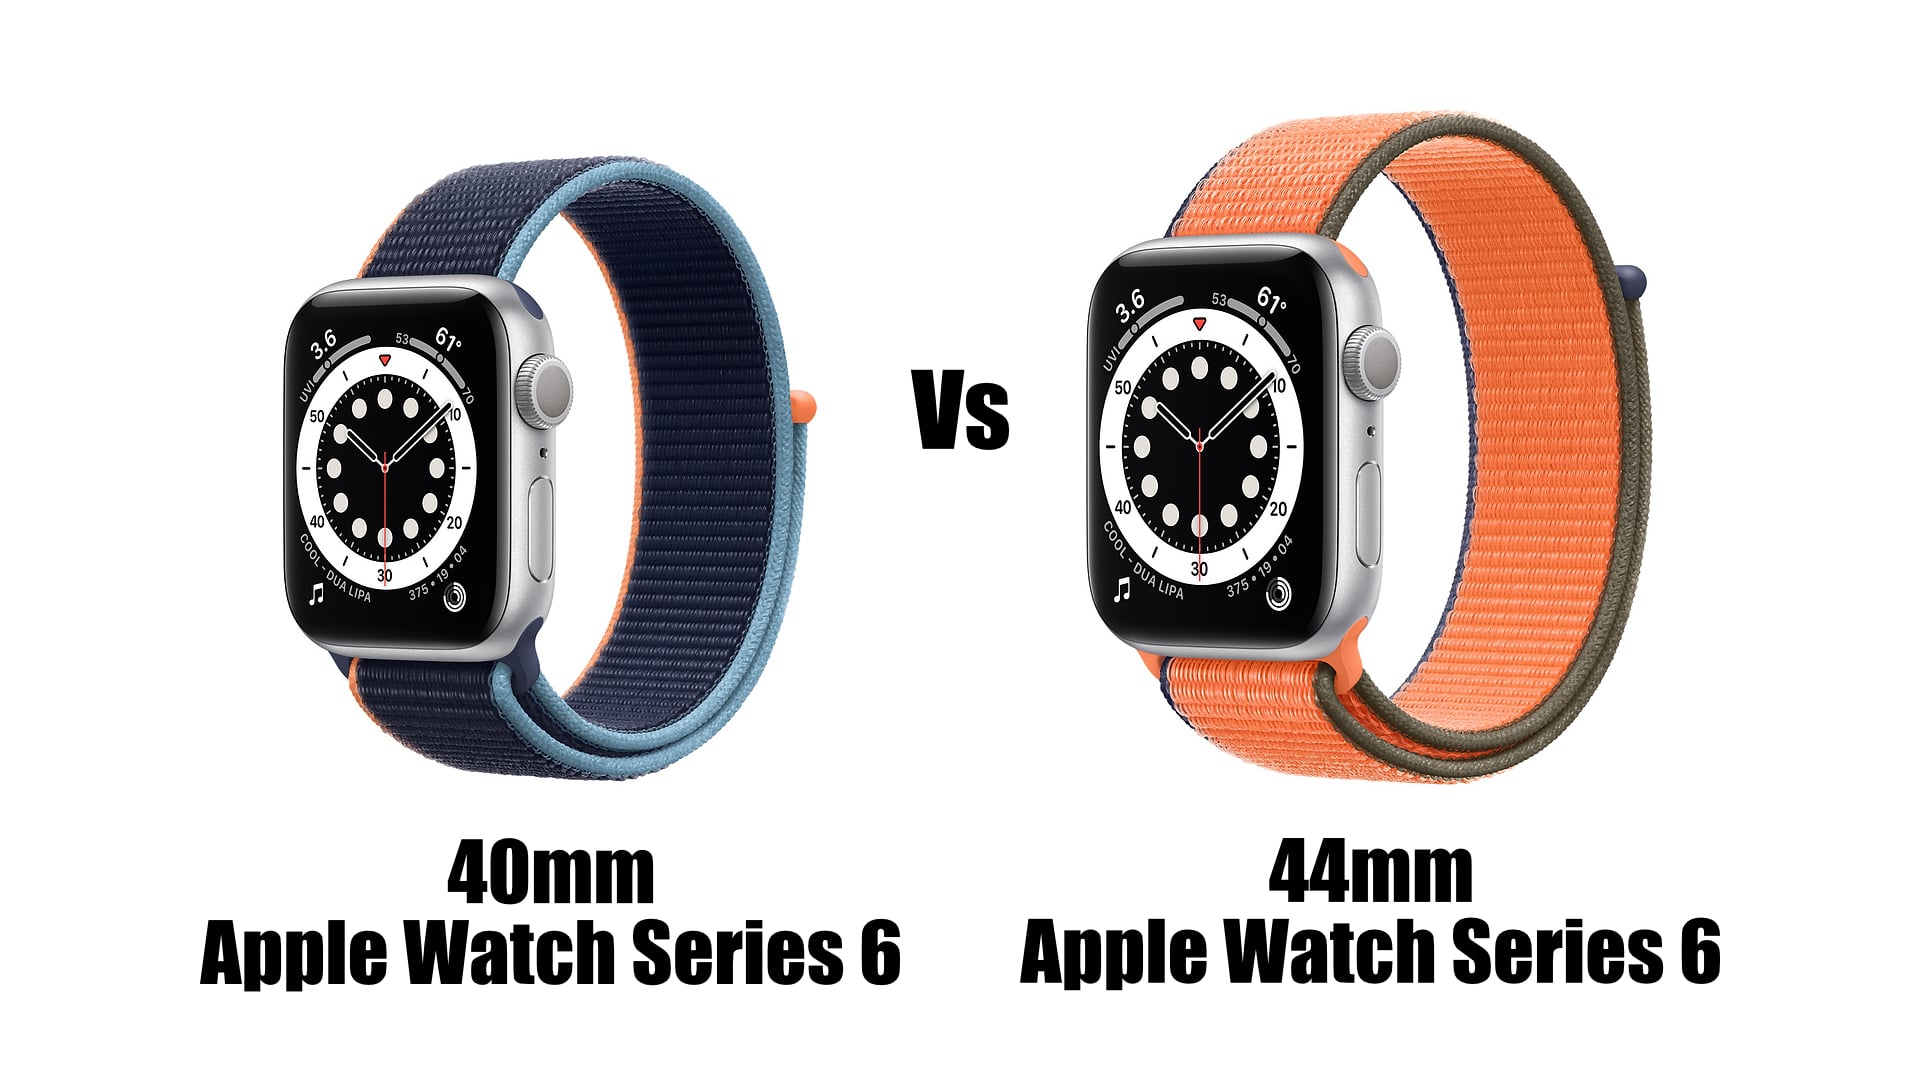 Which Apple Watch Series 6 Size Should You Buy — 40mm or 44mm?